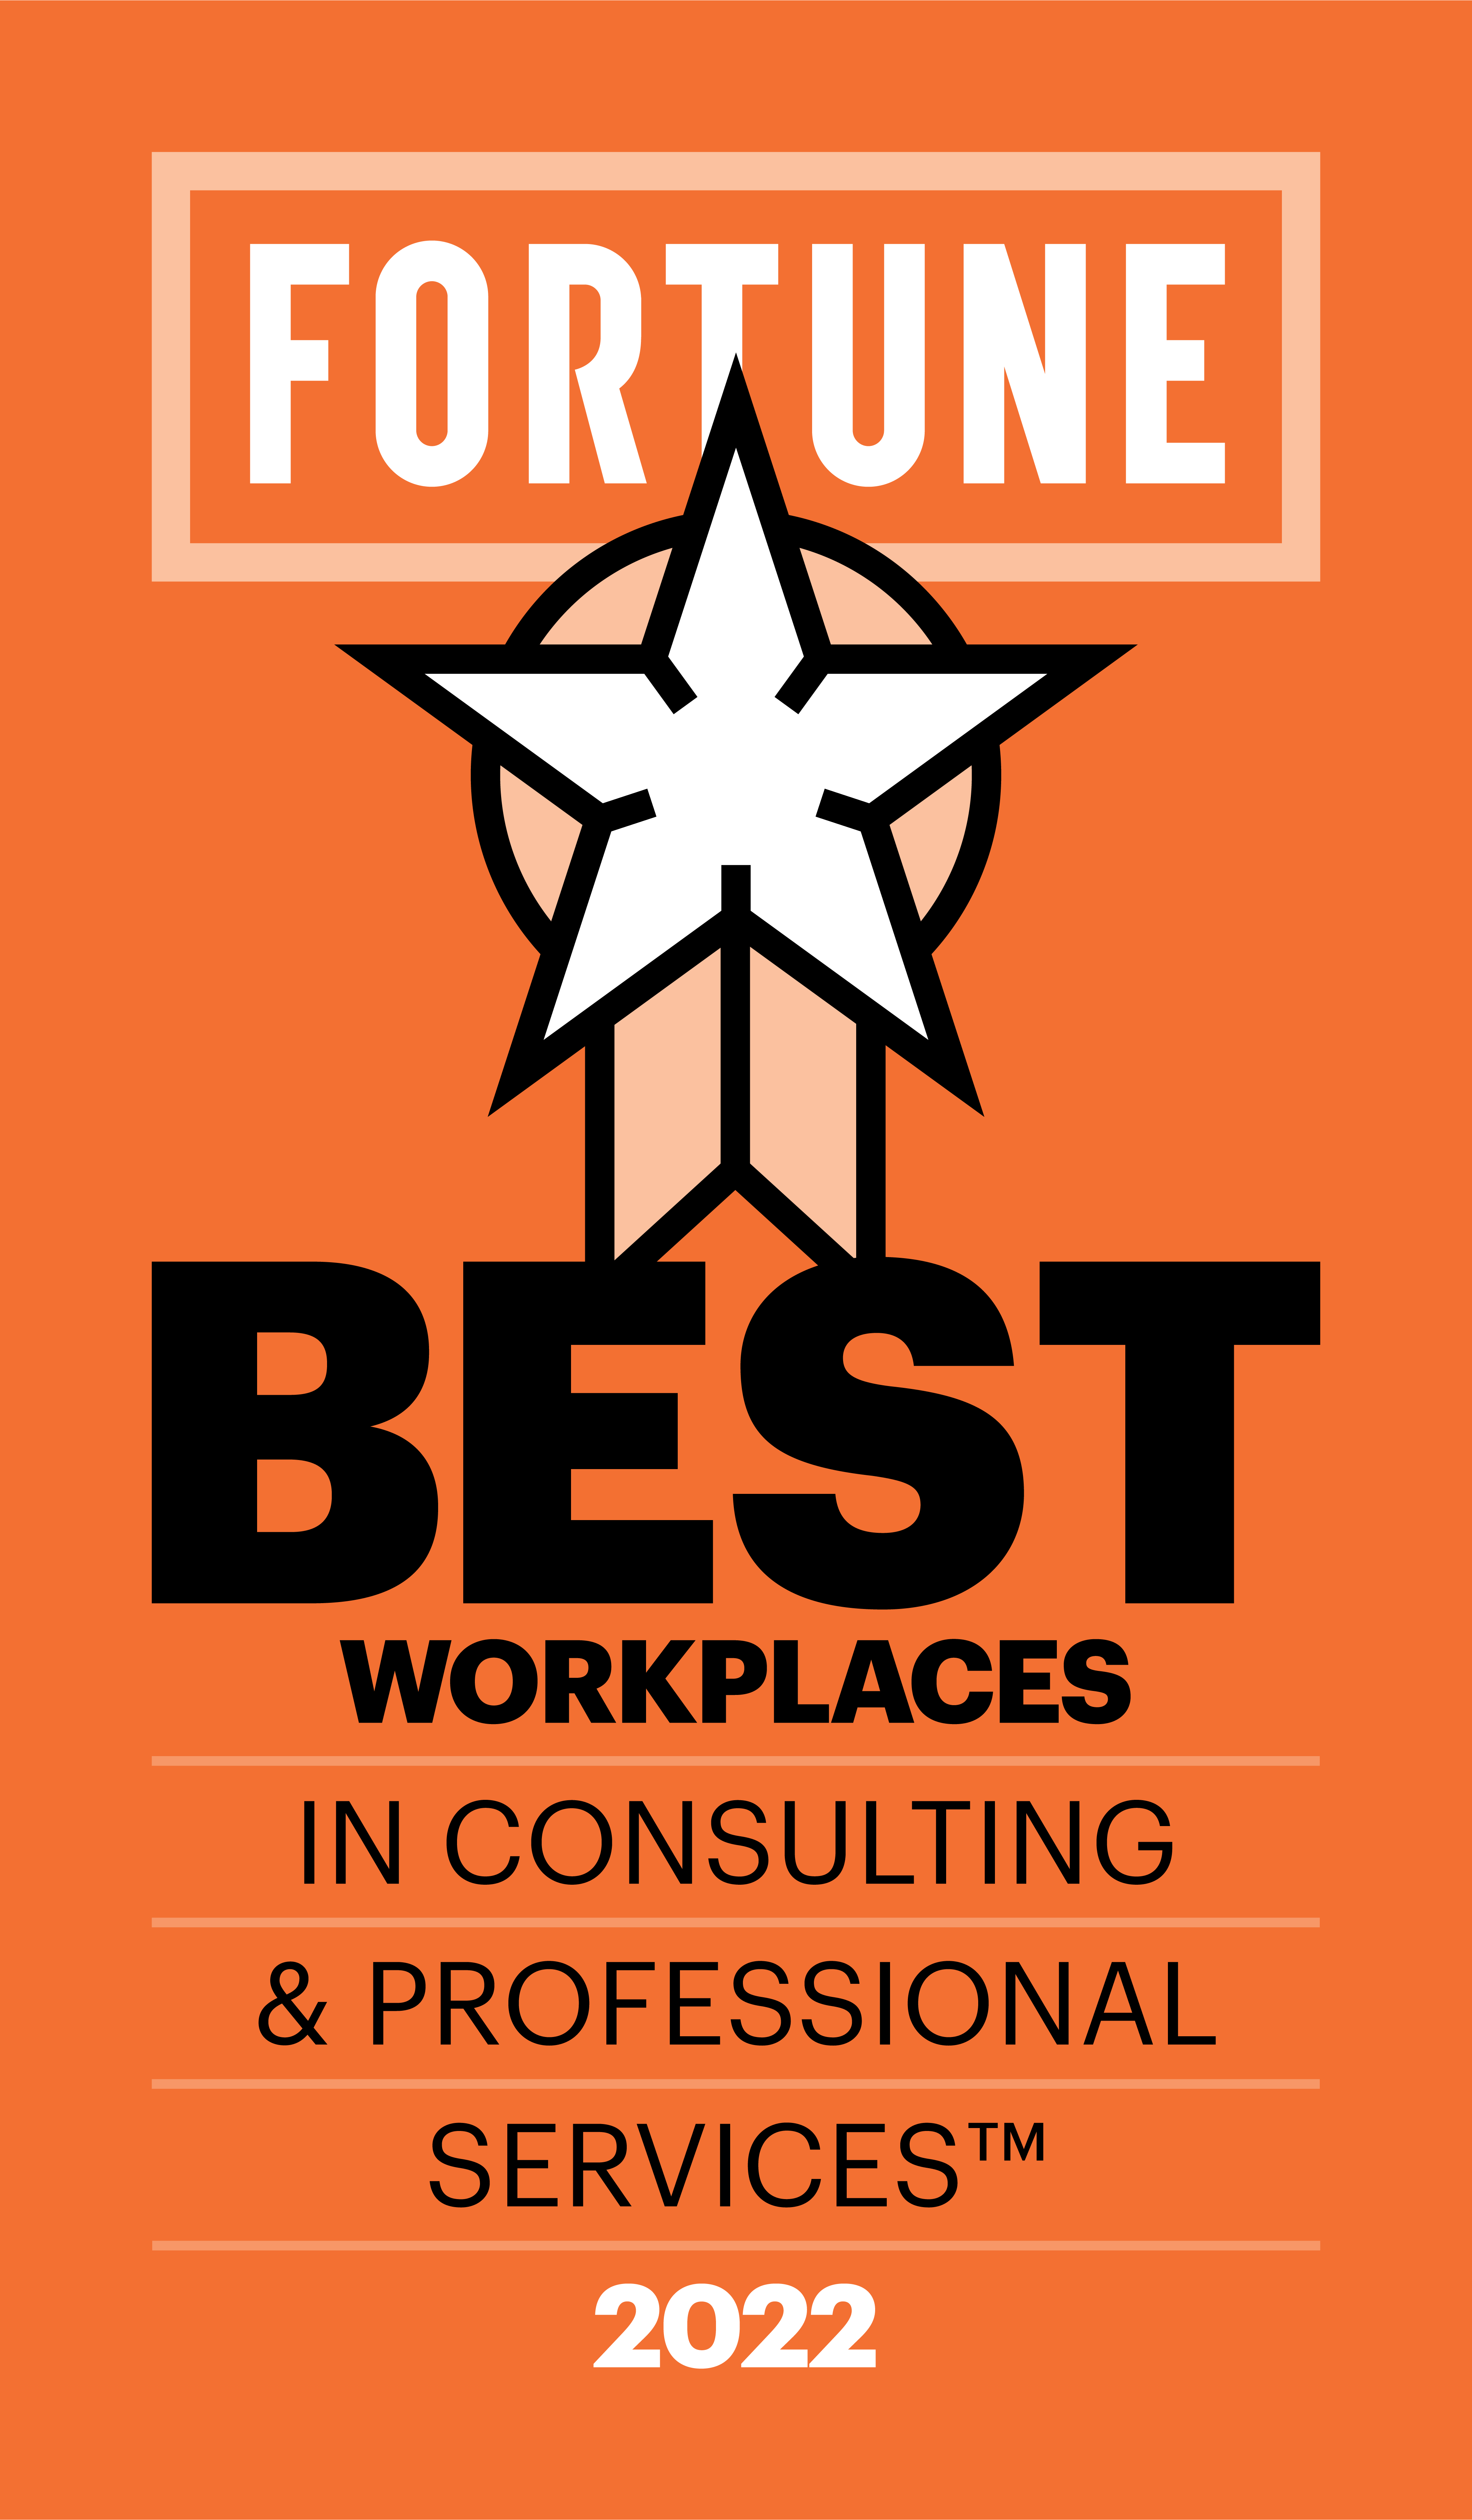 Fortune best workplaces